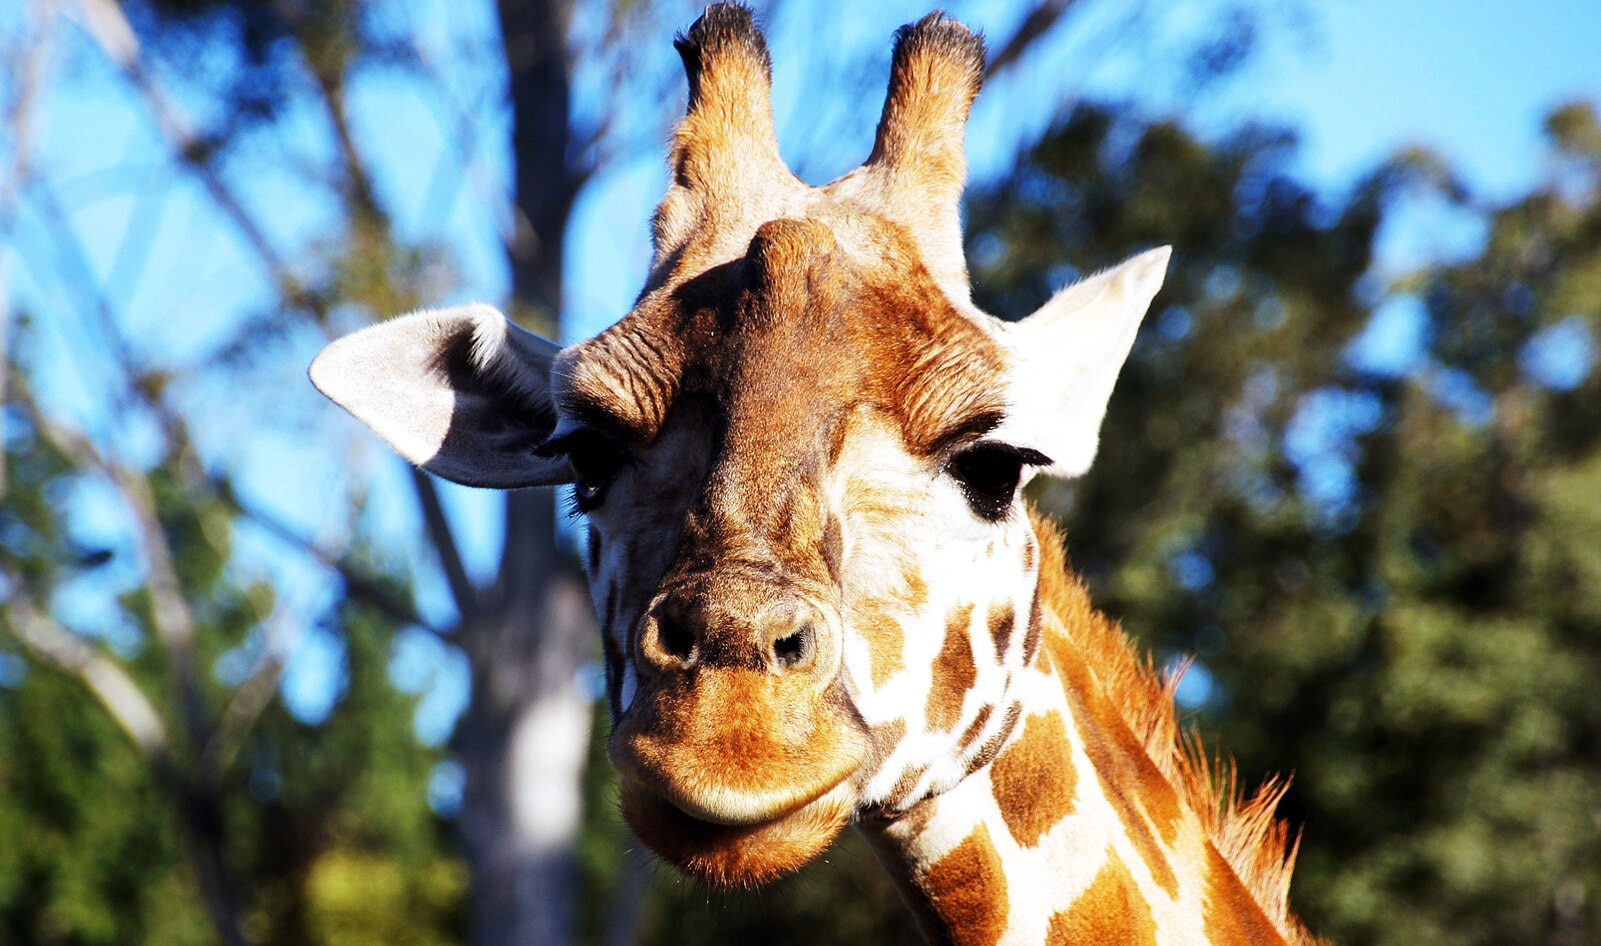 New York Becomes First State to Ban Sale of Giraffe Products